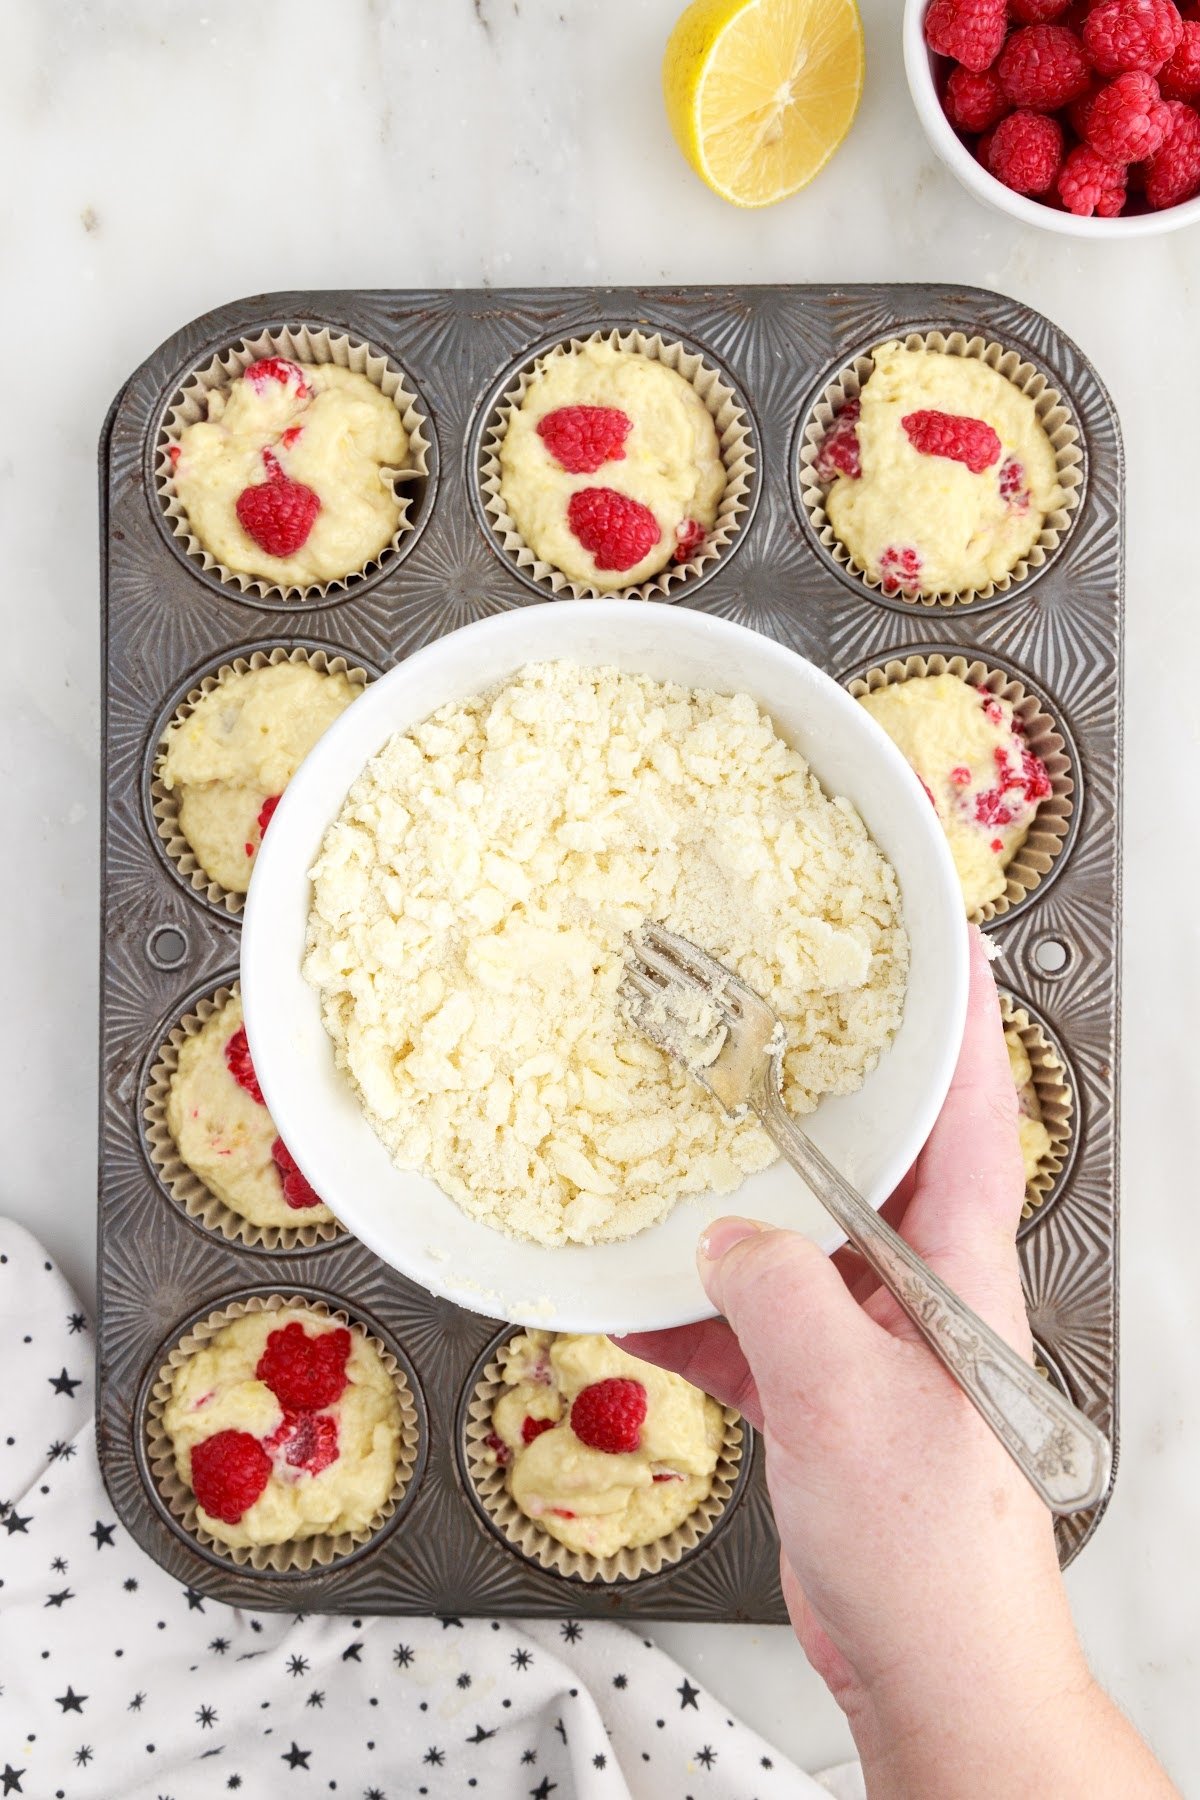 Streusel in a mixing bowl with a fork held over tray of raspberry lemon muffin batter.